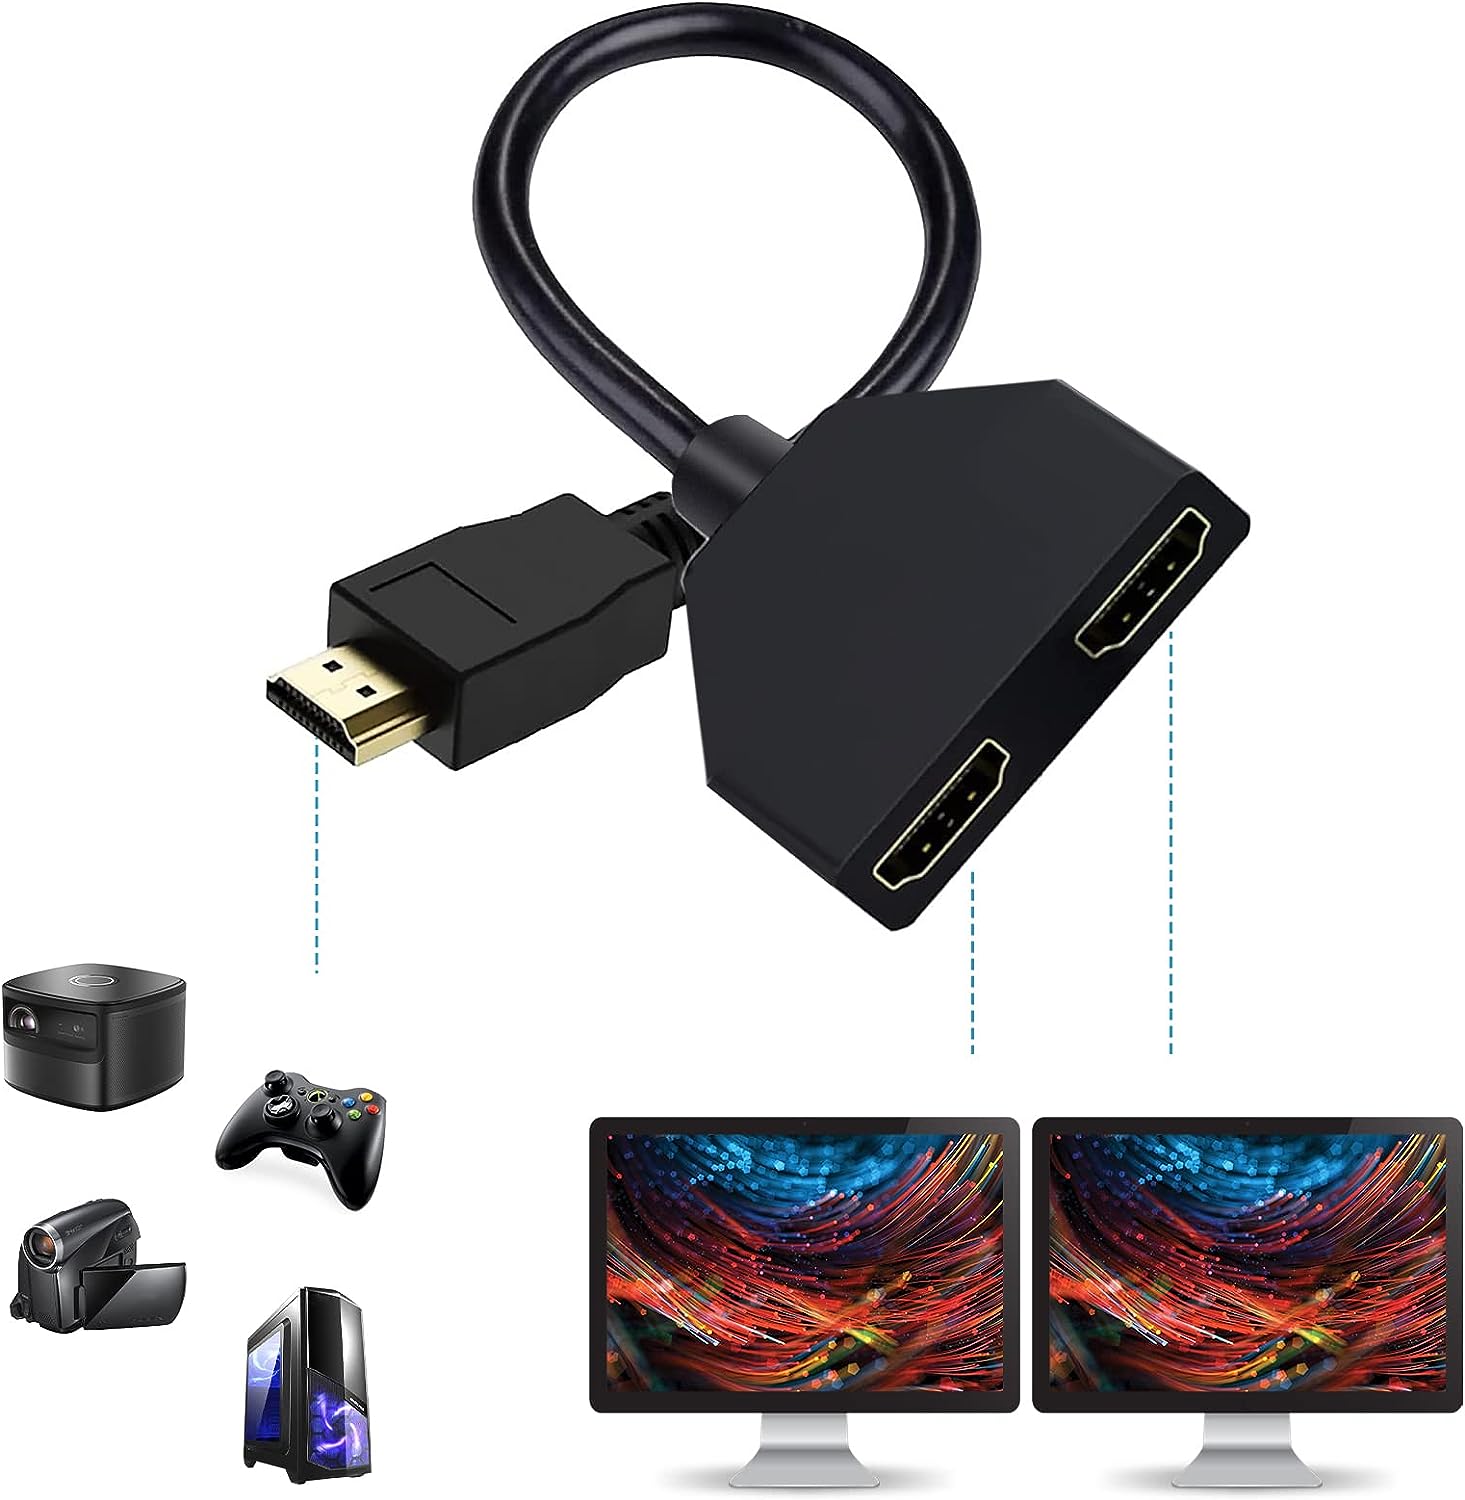 HDMI Splitter Adapter Cable -HDMI Splitter 1 in 2 Out [...]